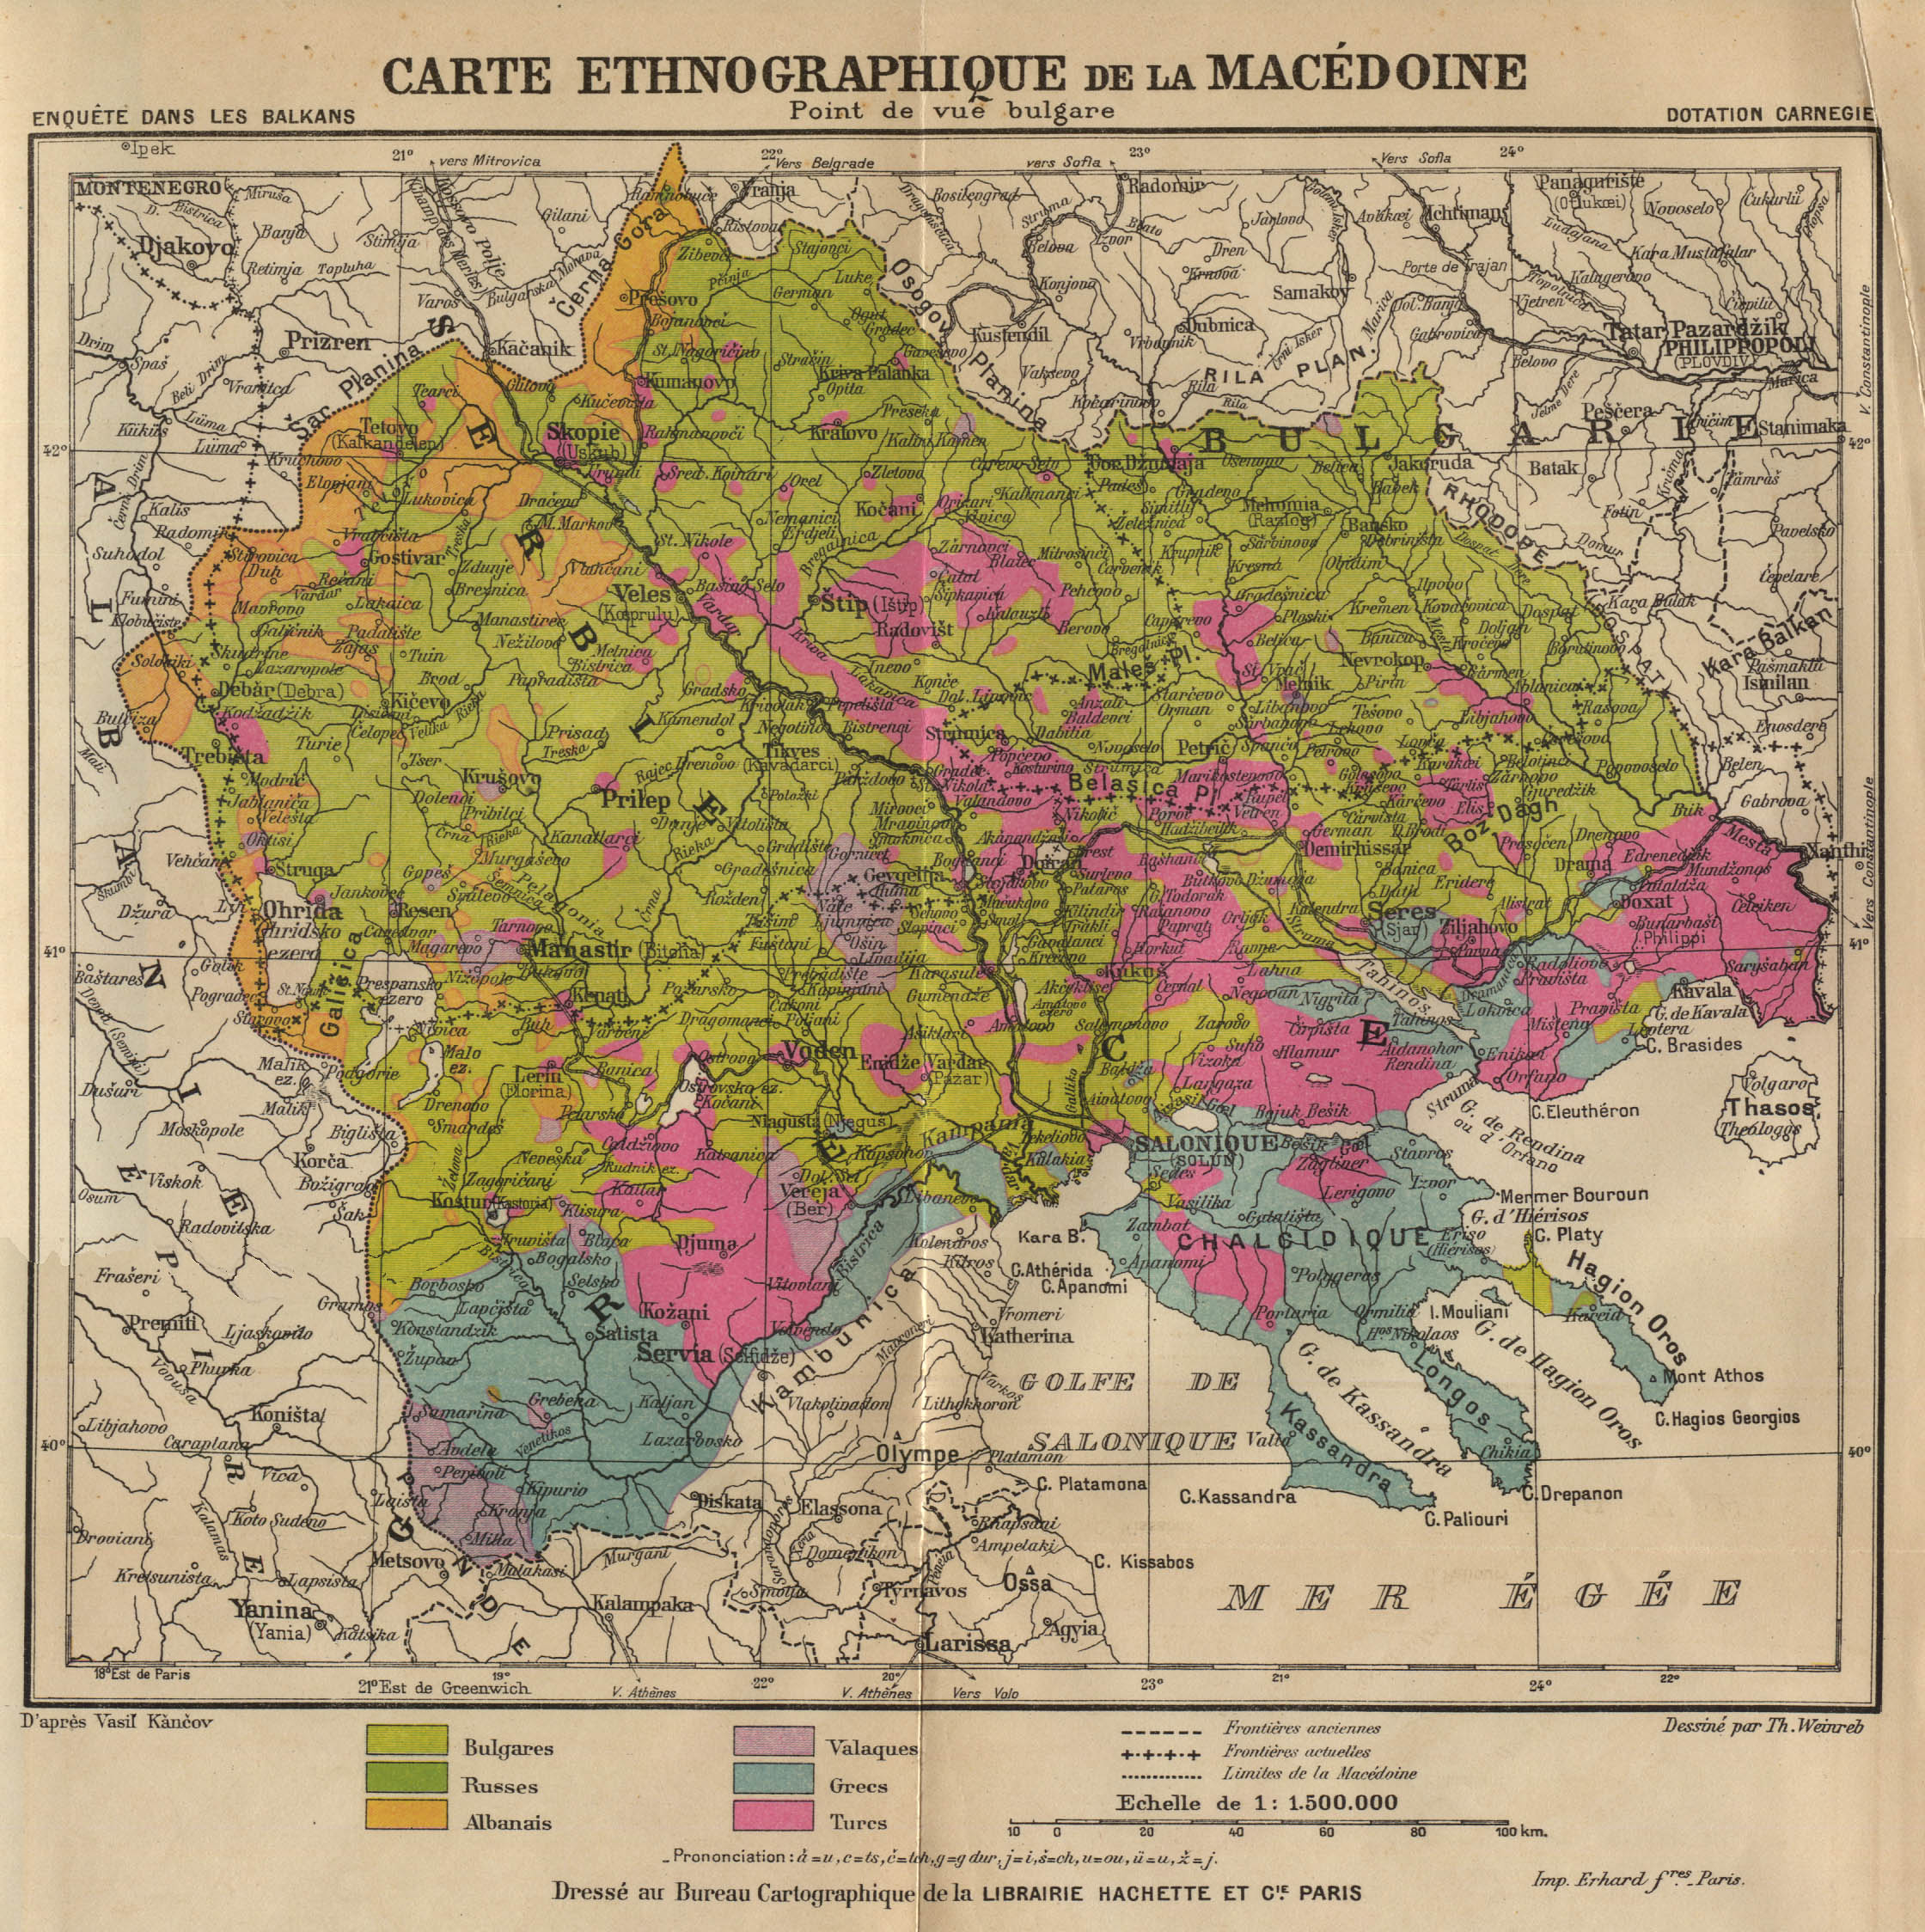 Historical Map of Balkan, Carte Ethnographique de la Macedoine: Point de vue bulgare (998K)
[Ethnographic map of Macedonia from the point of view of the Bulgarians]. Map from Report of the International Commission To Inquire into the Causes and Conduct of the Balkan Wars- 1914. 